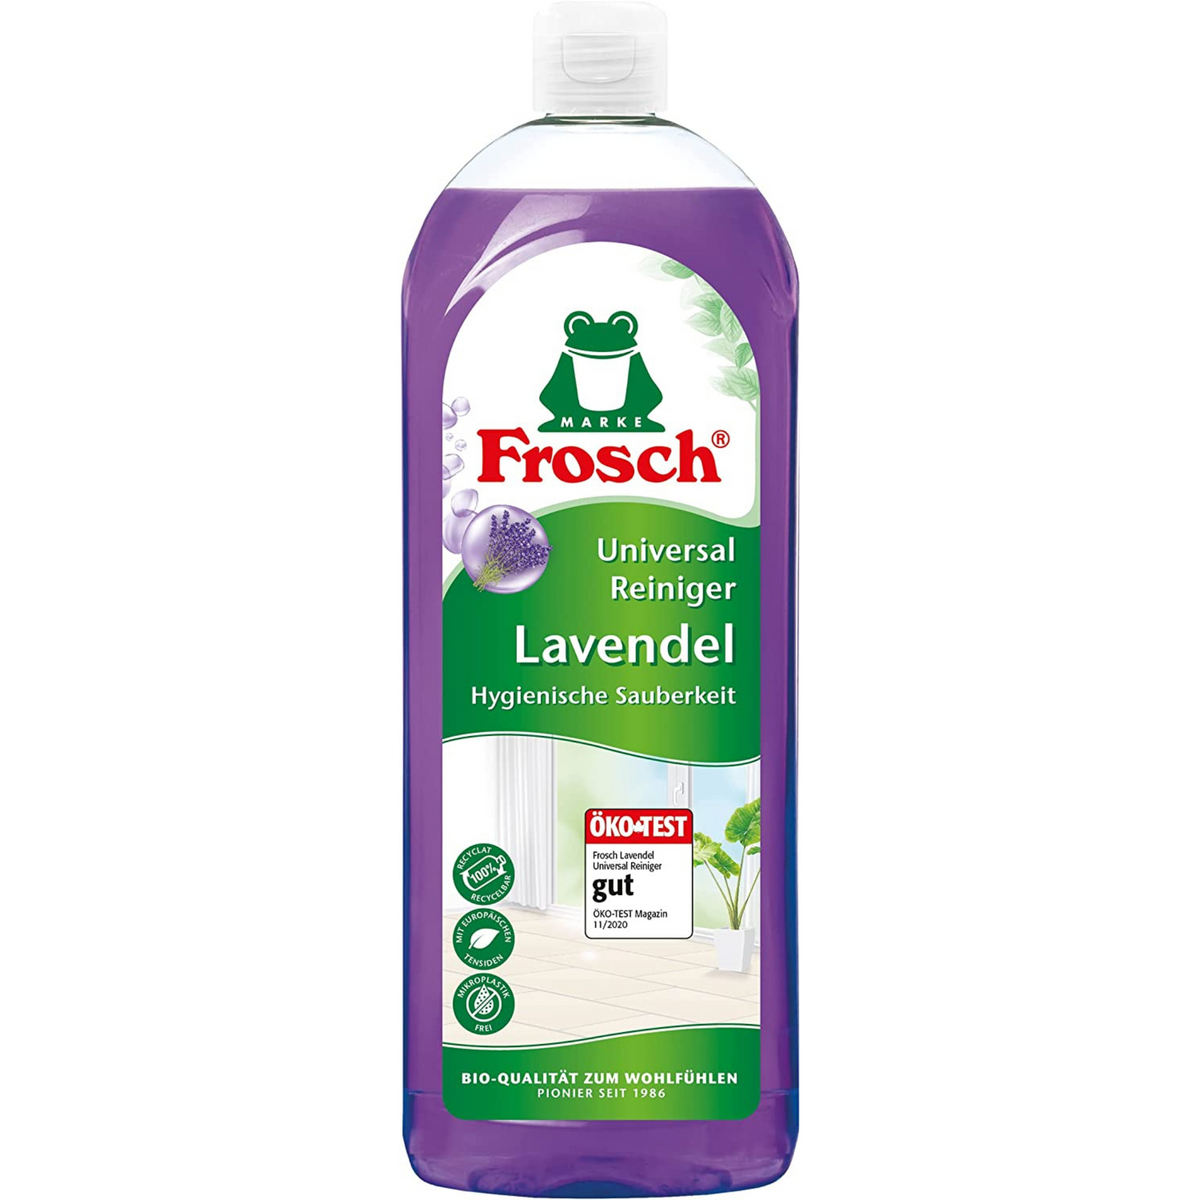 Primary Image of Frosch Lavender Universal Cleaning Liquid (750 ml)